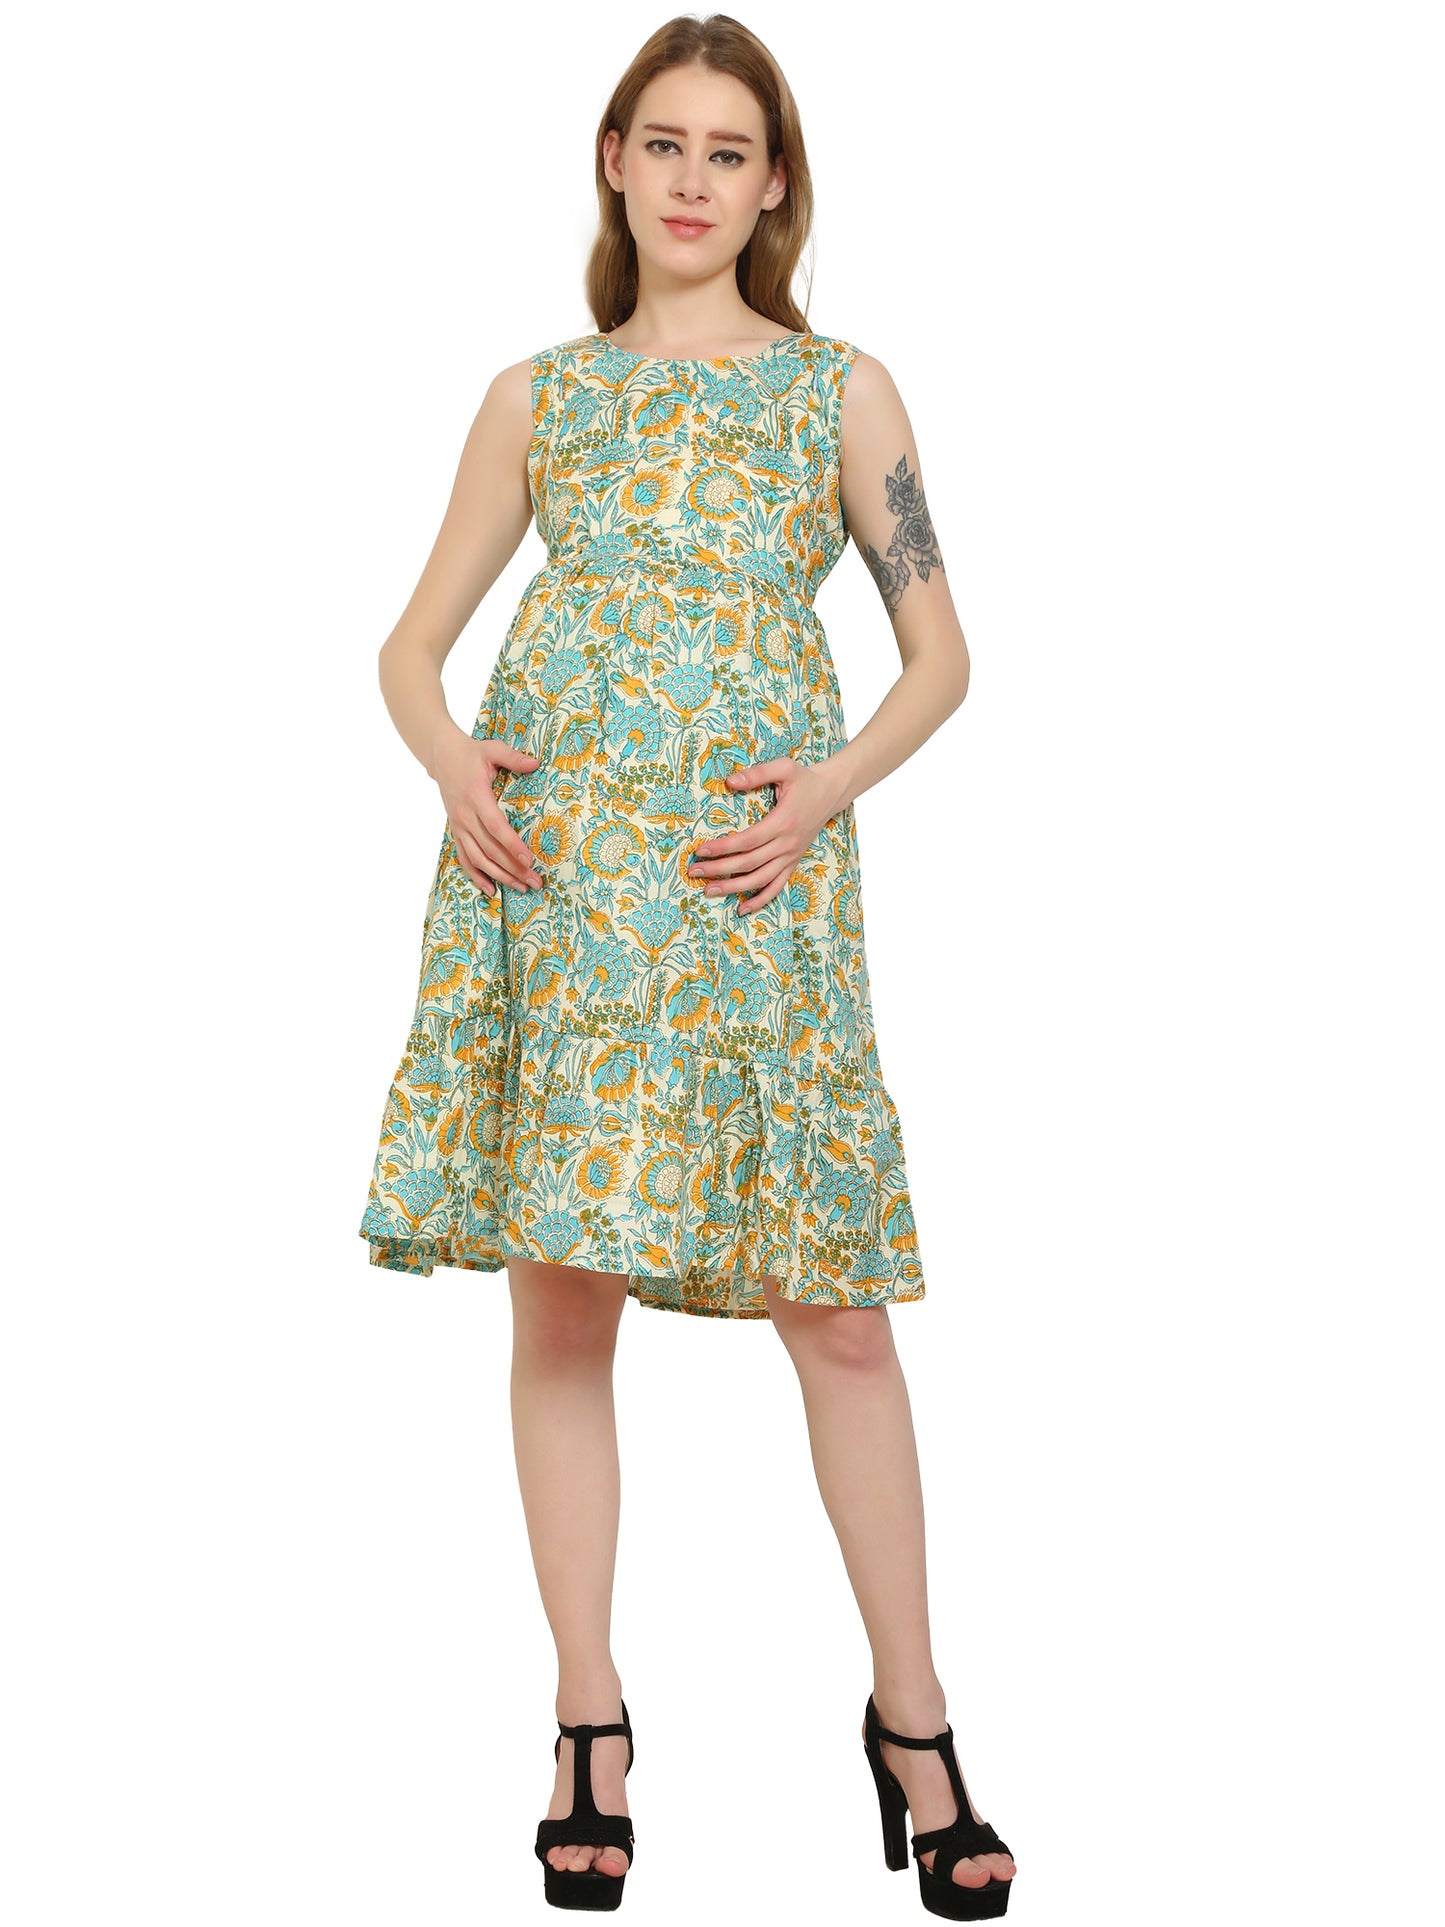 Maternity Dress | Pure Cotton | Multicolor Layered Dress | Feeding Dress | Pre and Post Pregnancy